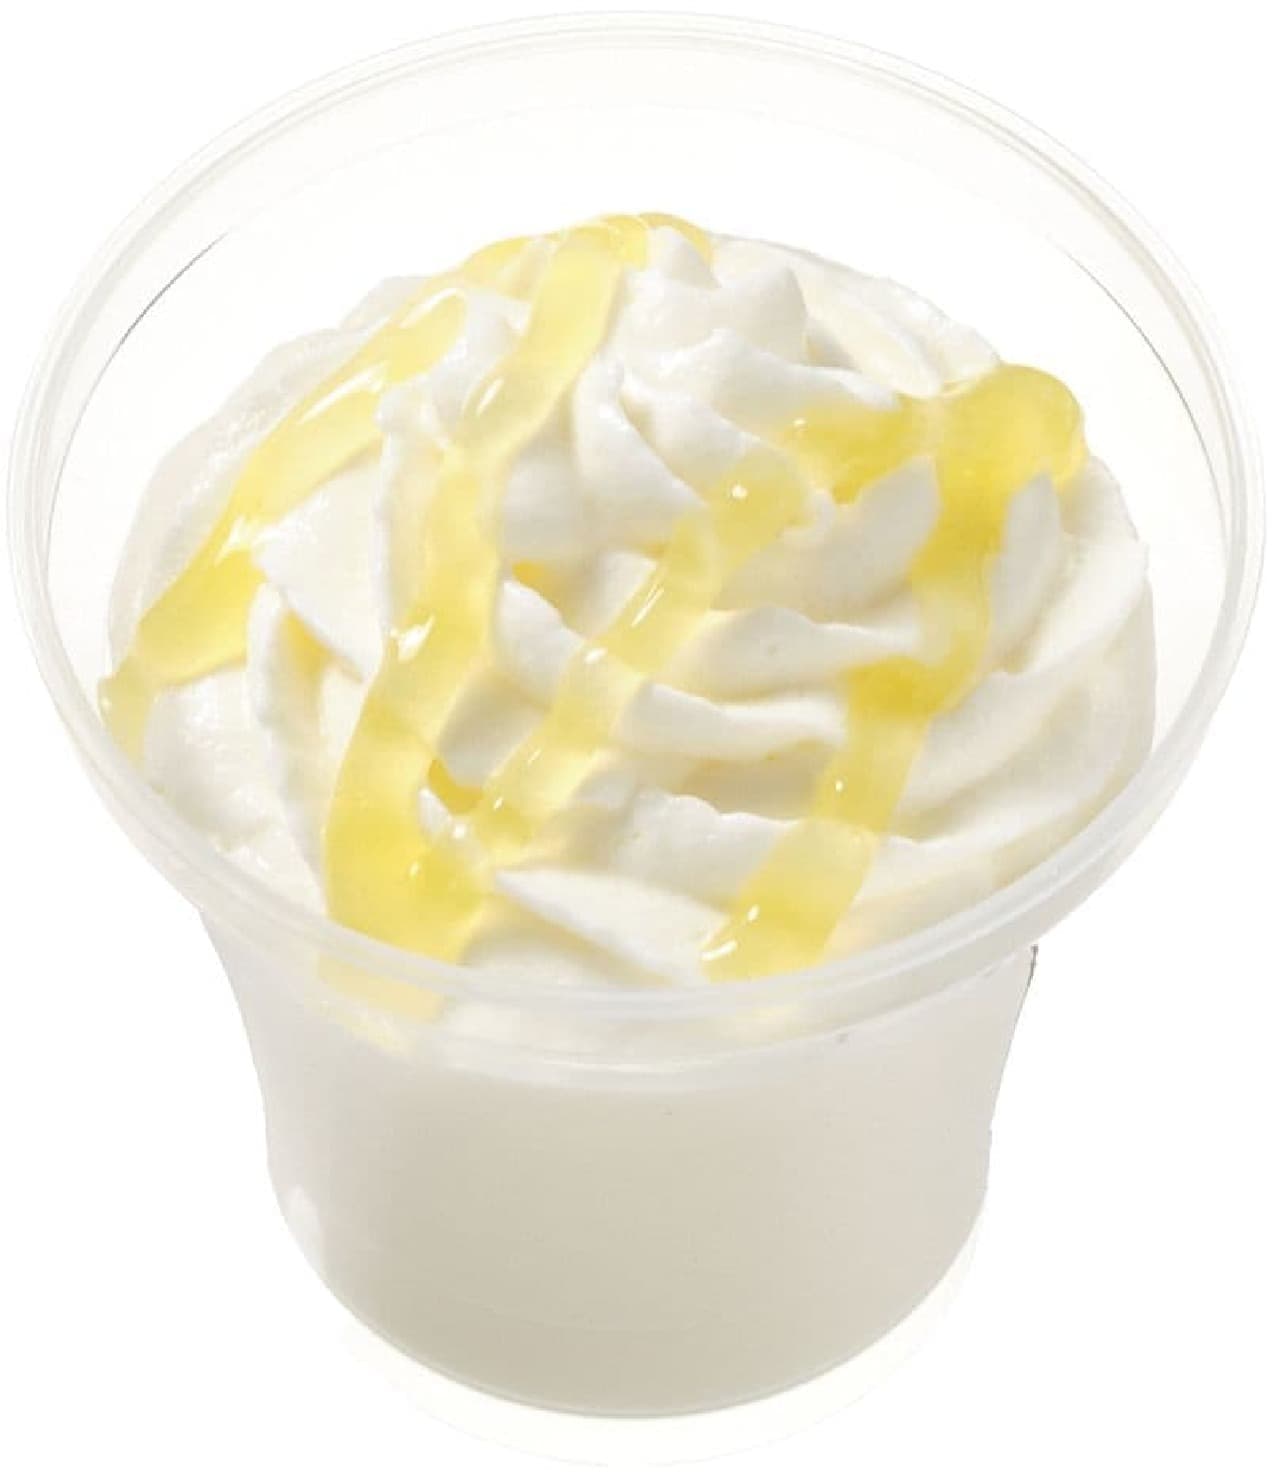 7-ELEVEN "Milk Pudding with Lemon Sauce & Whipped Cream